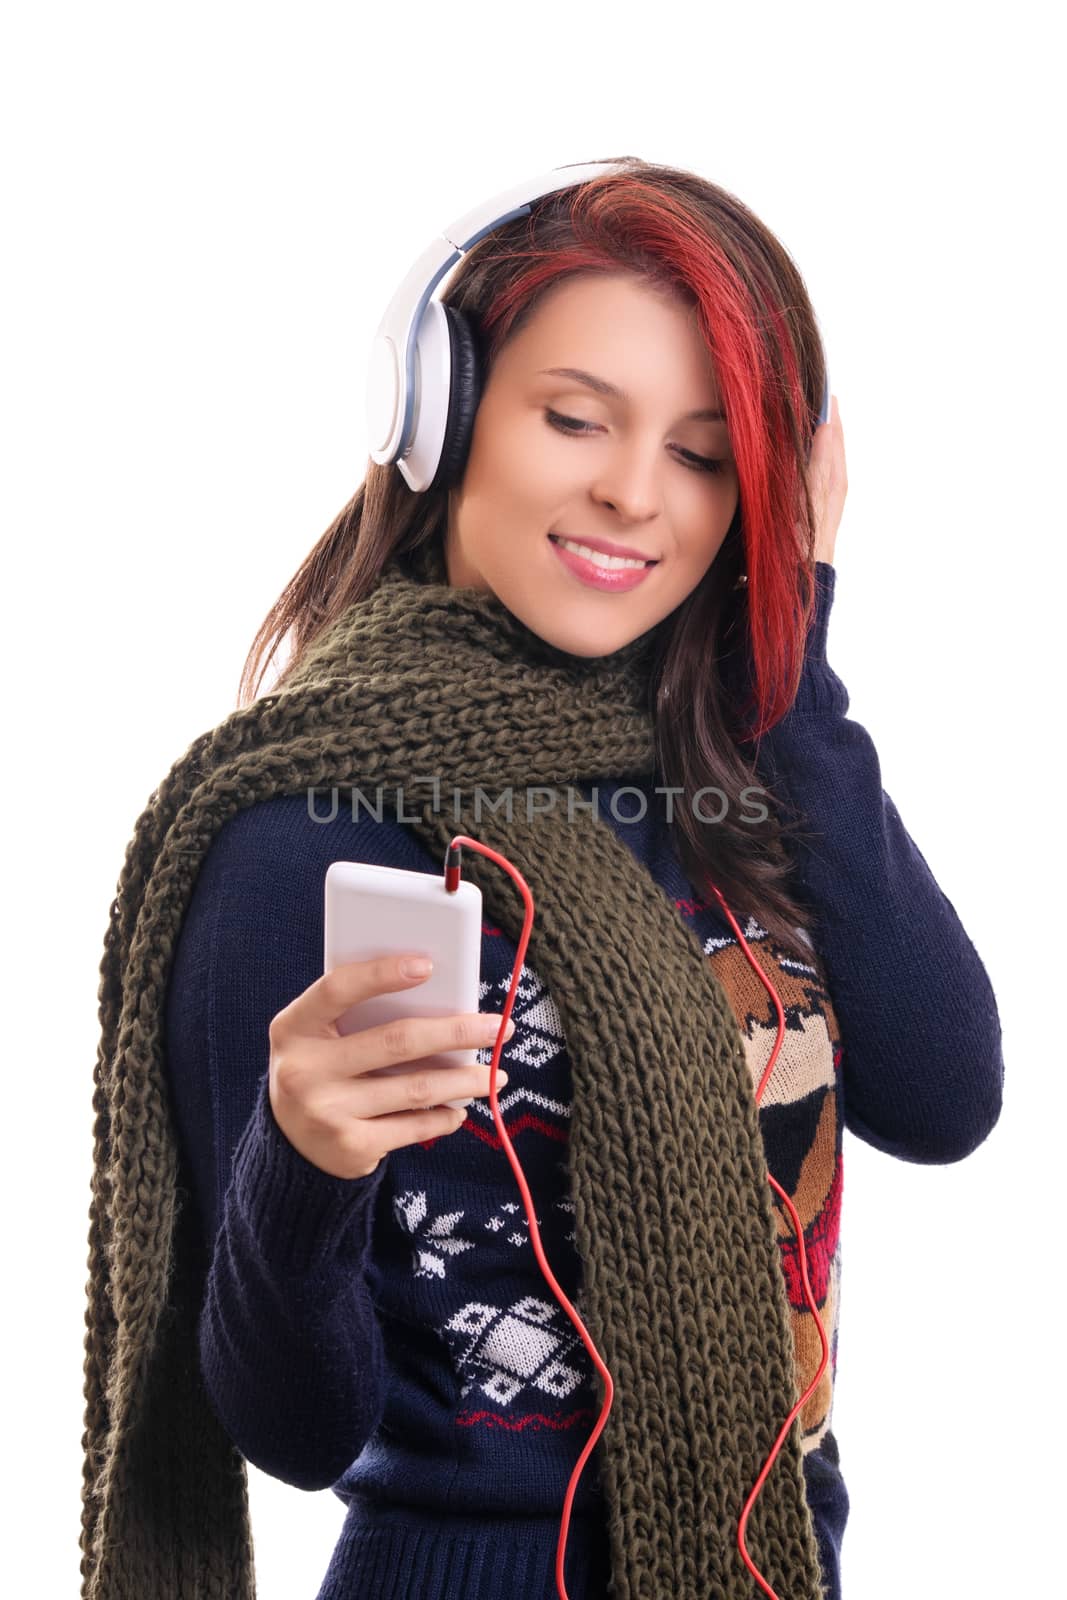 Beautiful smiling young woman wearing winter scarf with headphones listening to music, looking at her mobile phone, isolated on white background. Season, technology and people concept.